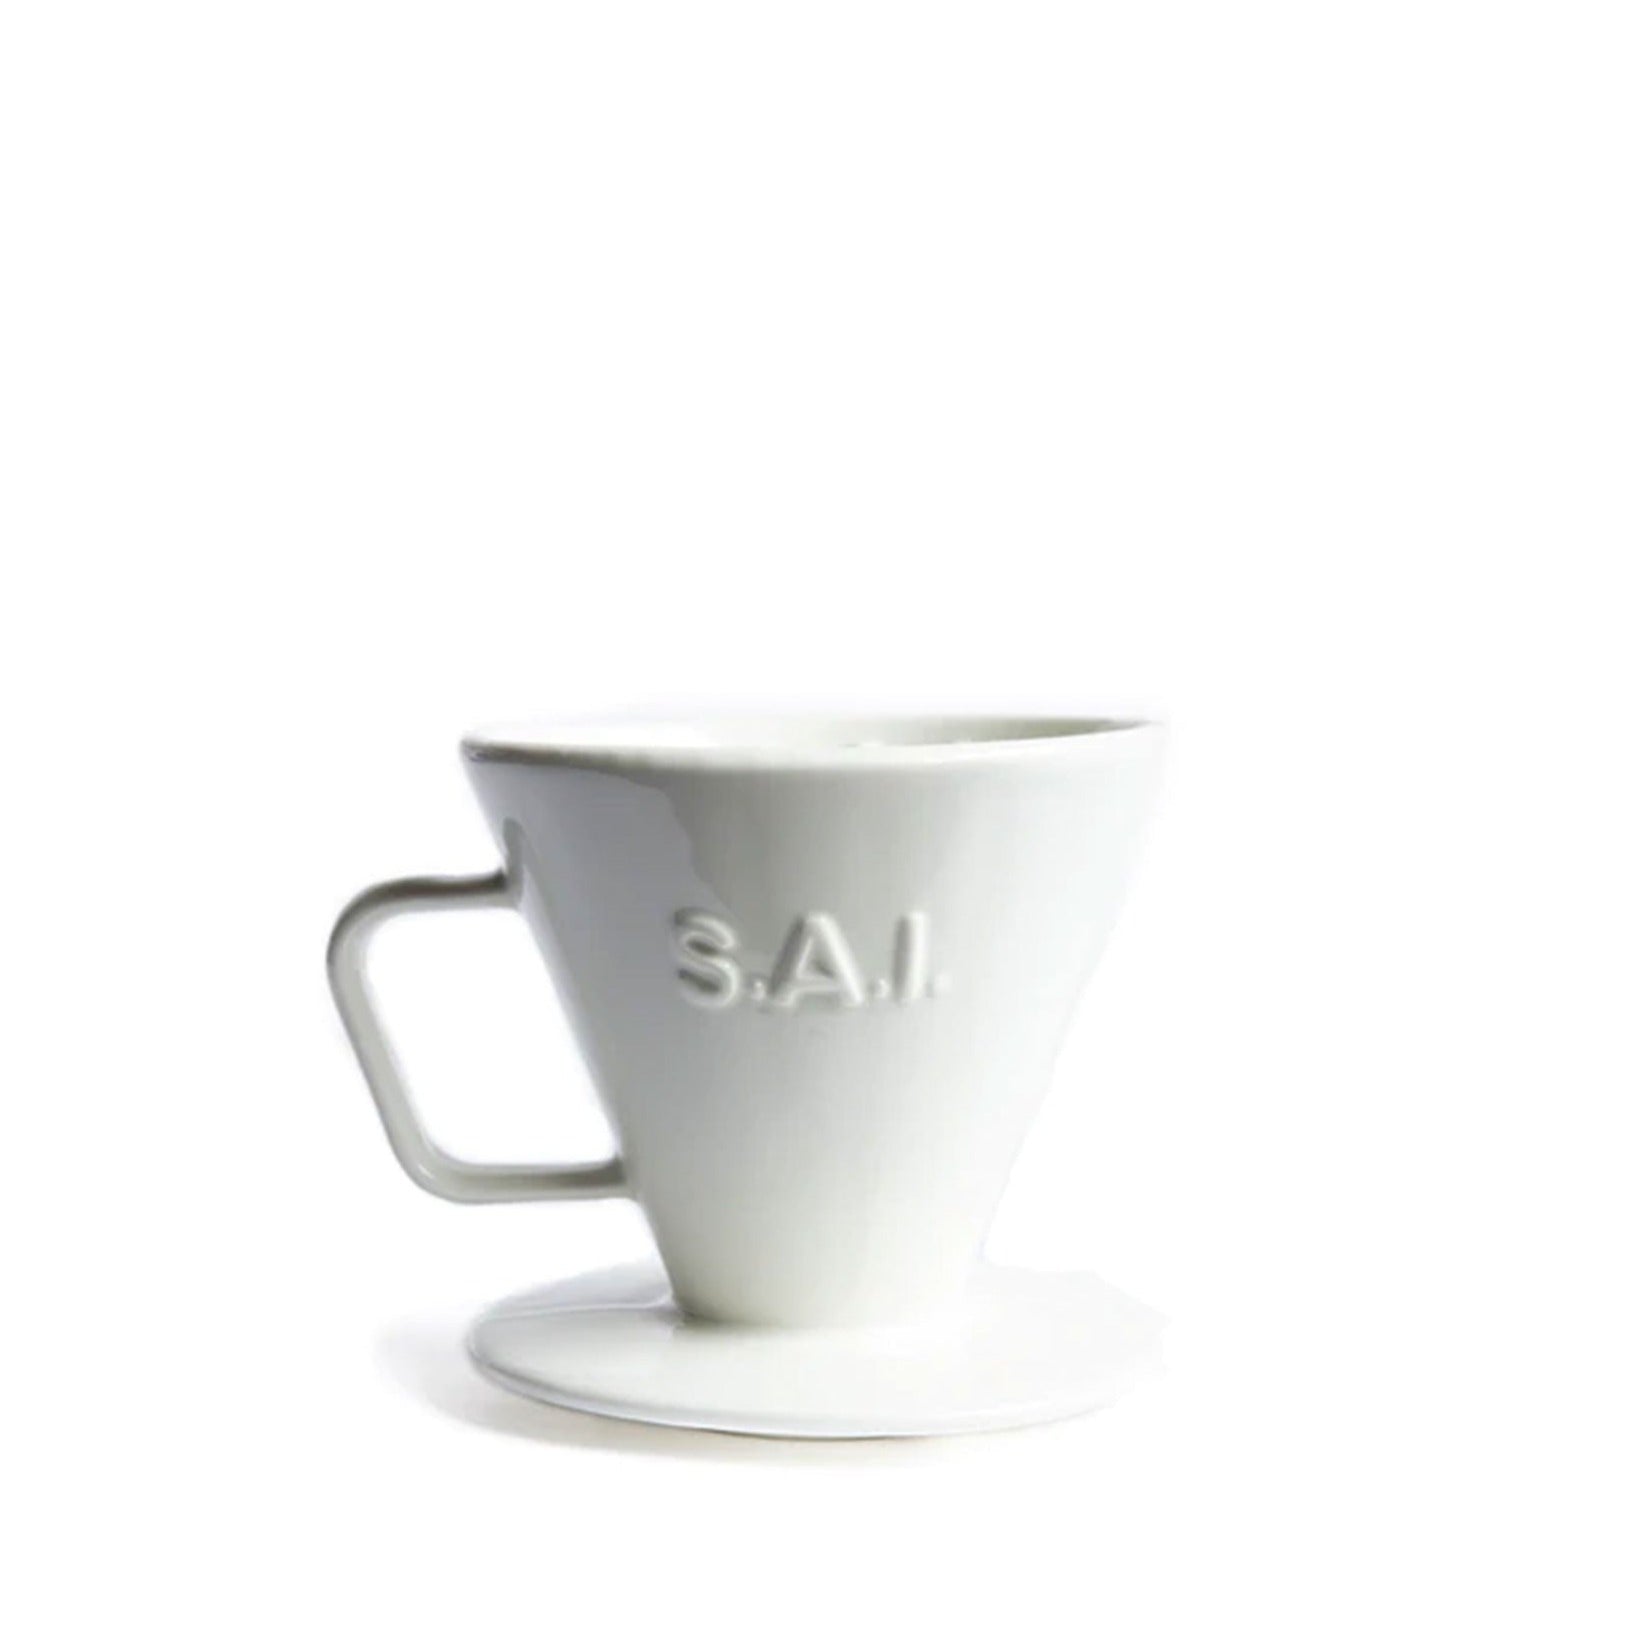 SAI C70 Ceramic Pourover BrewerSAI C70 Ceramic Pourover BrewerCollective Coffee RoastersThe C70 is Saint Anthony Industries design progression of the standard ceramic pourover we have always enjoyed. Complete with the utilitarian performance of ceramic 